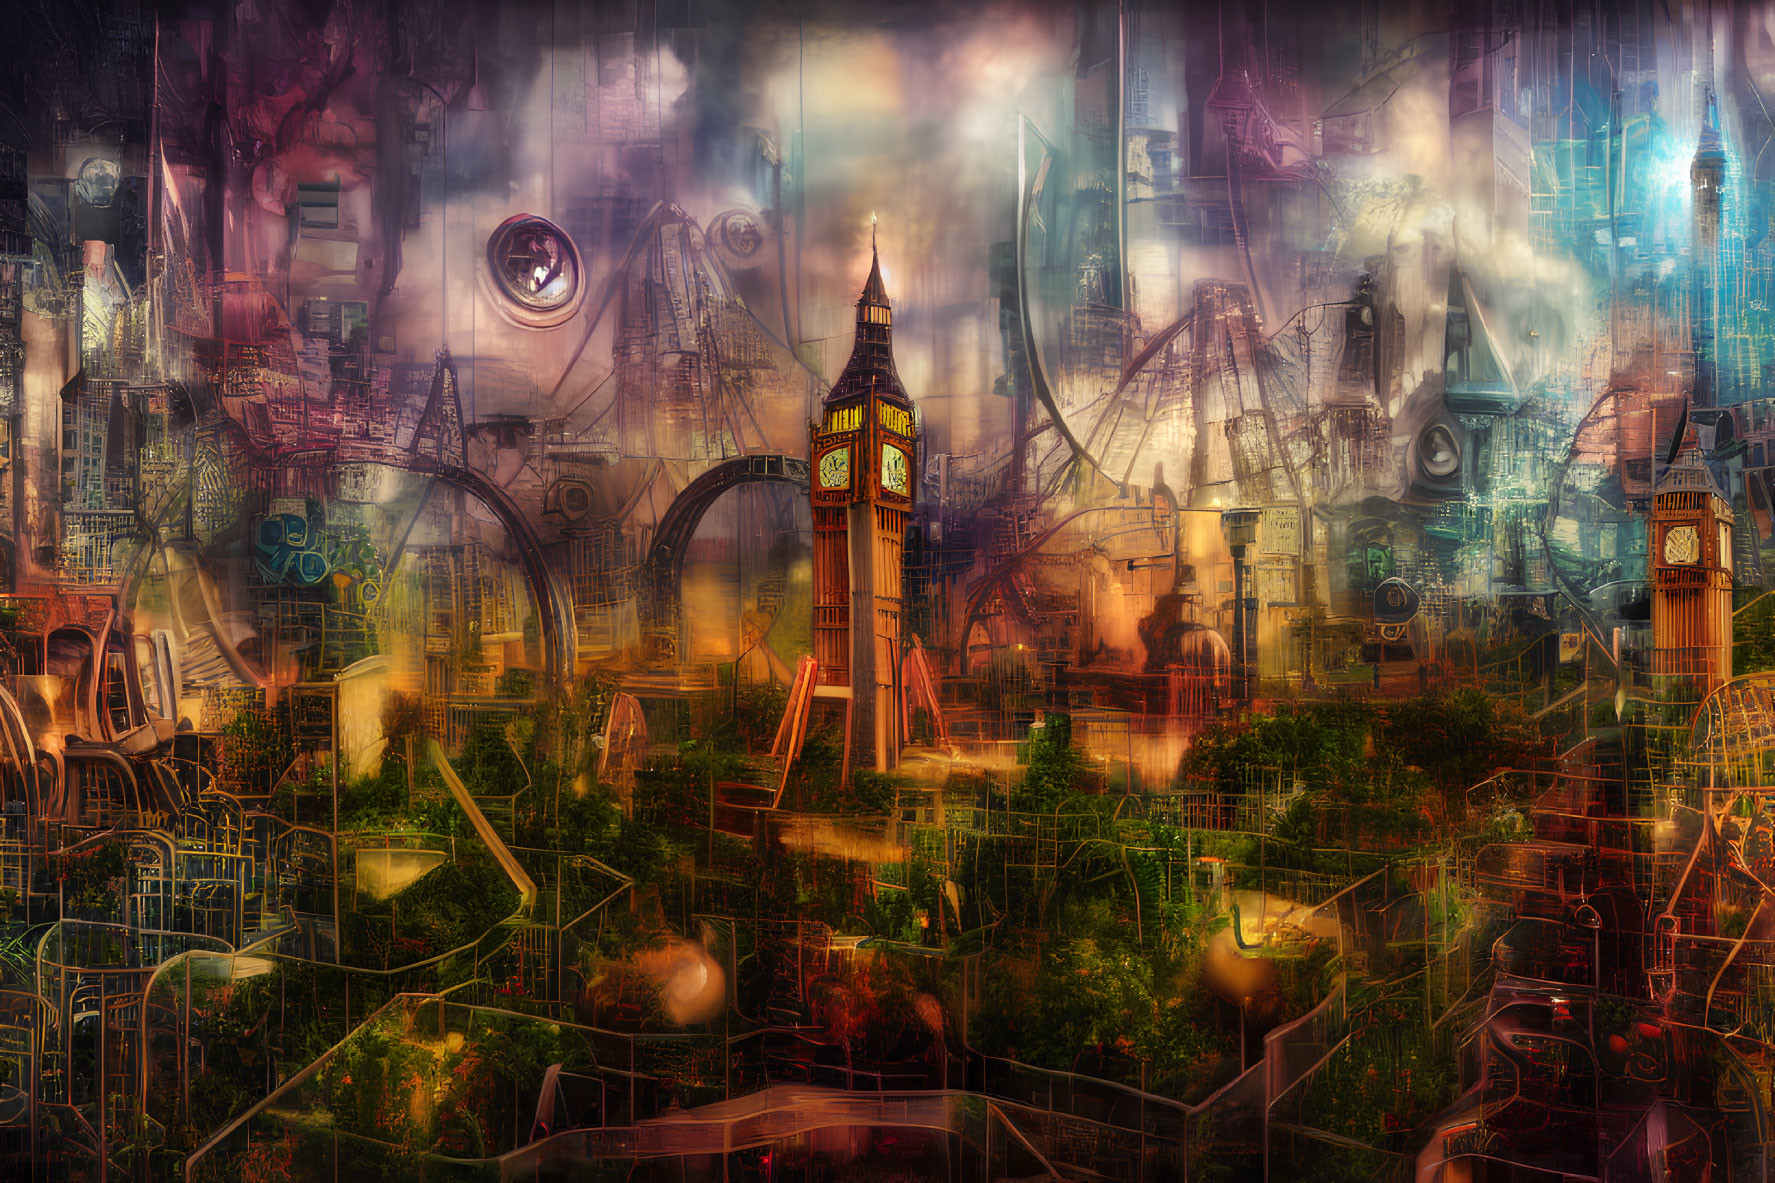 Colorful Surreal London Landmarks Collage with Abstract and Mechanical Elements